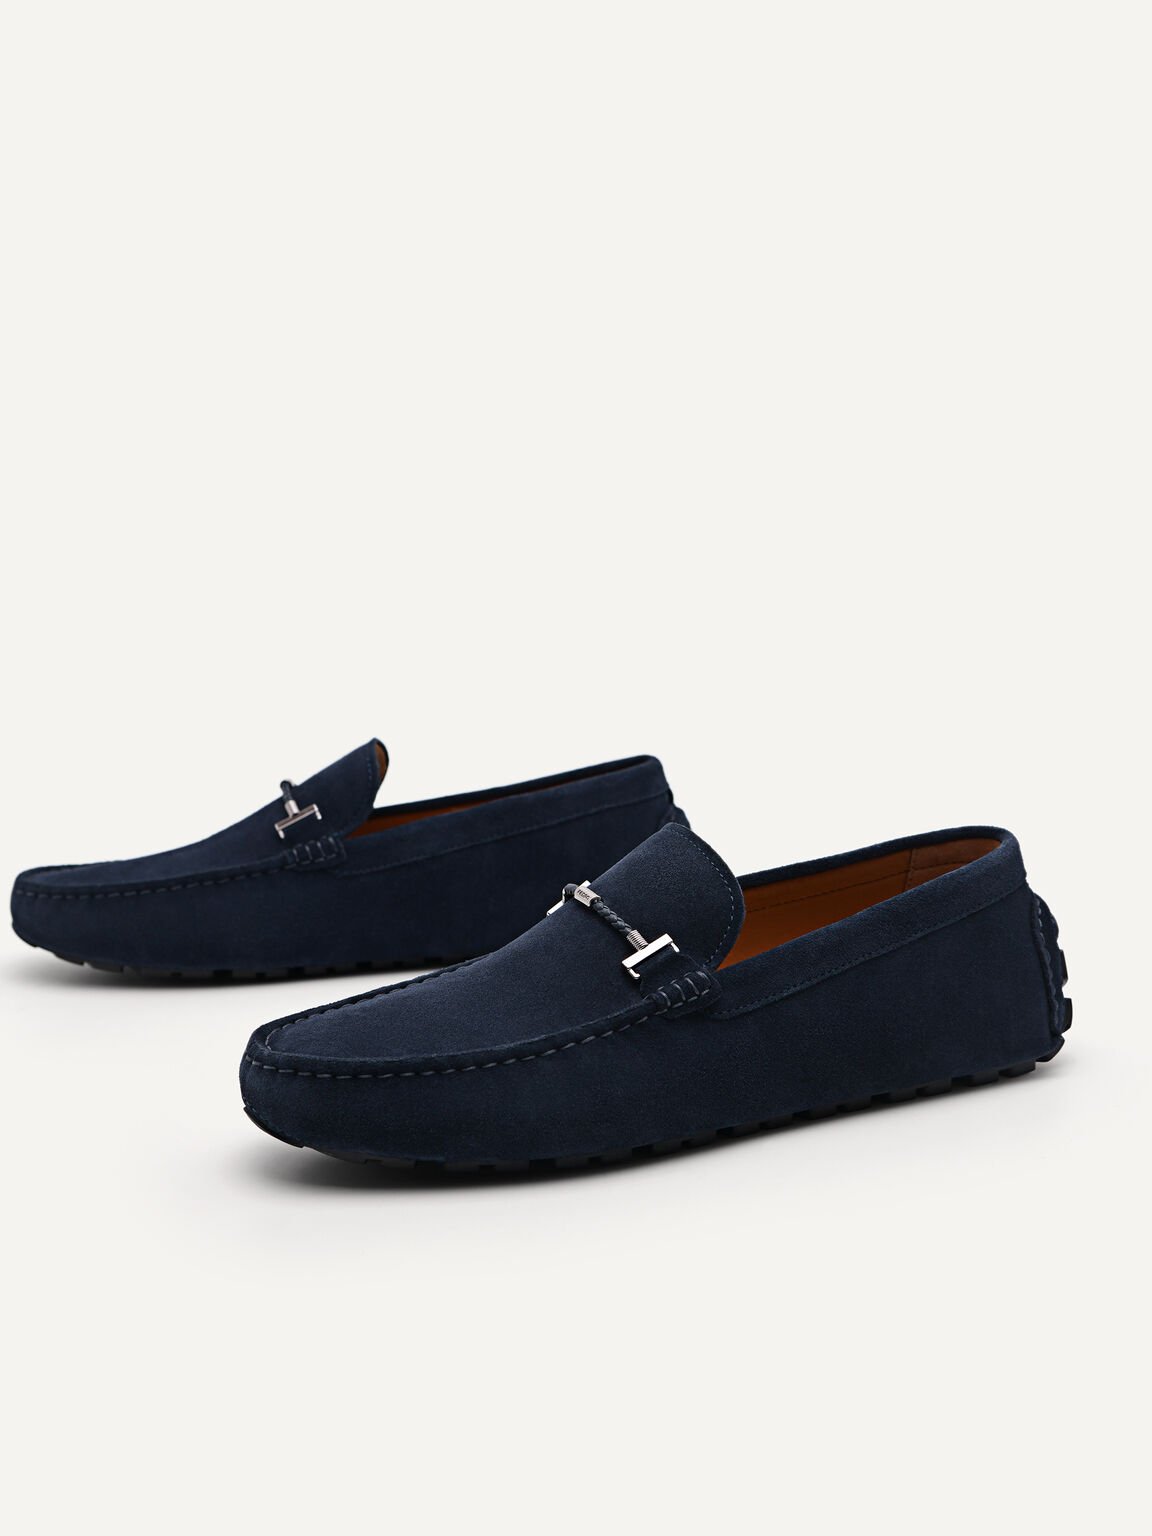 Robert Suede Leather Moccasins, Navy